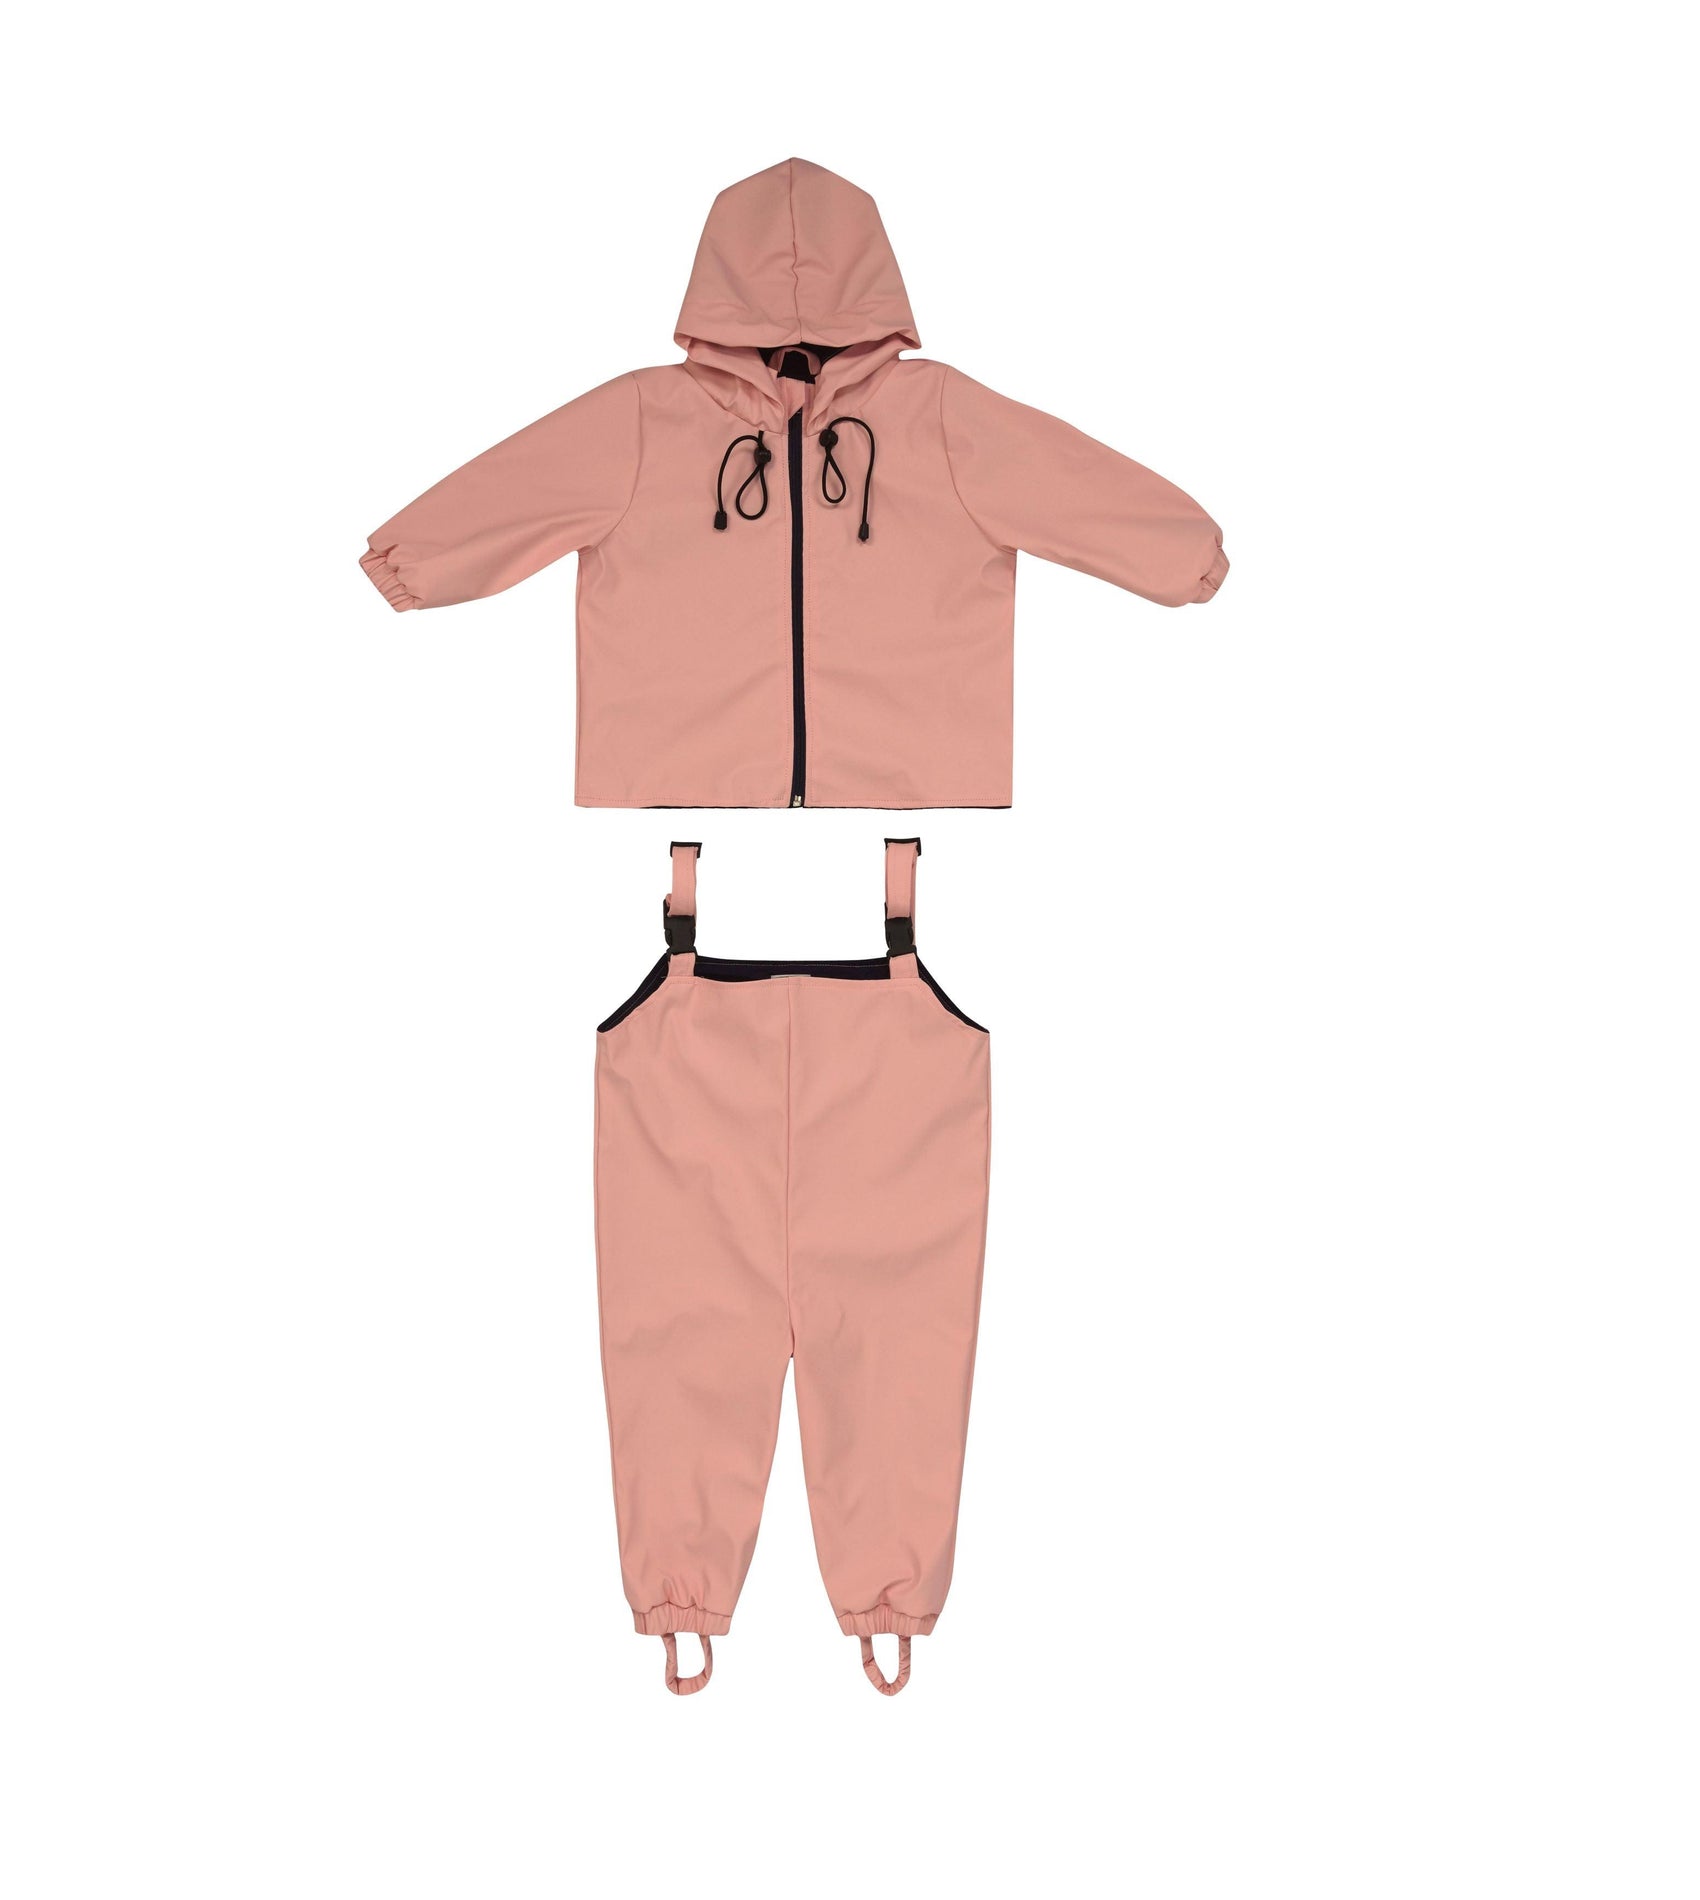 A Waterproof Baby/Kid Clothing Set - Rosa from MellowConceptStore, consisting of a pink hooded jacket and matching pants with adjustable suspenders, laid out flat against a white background.